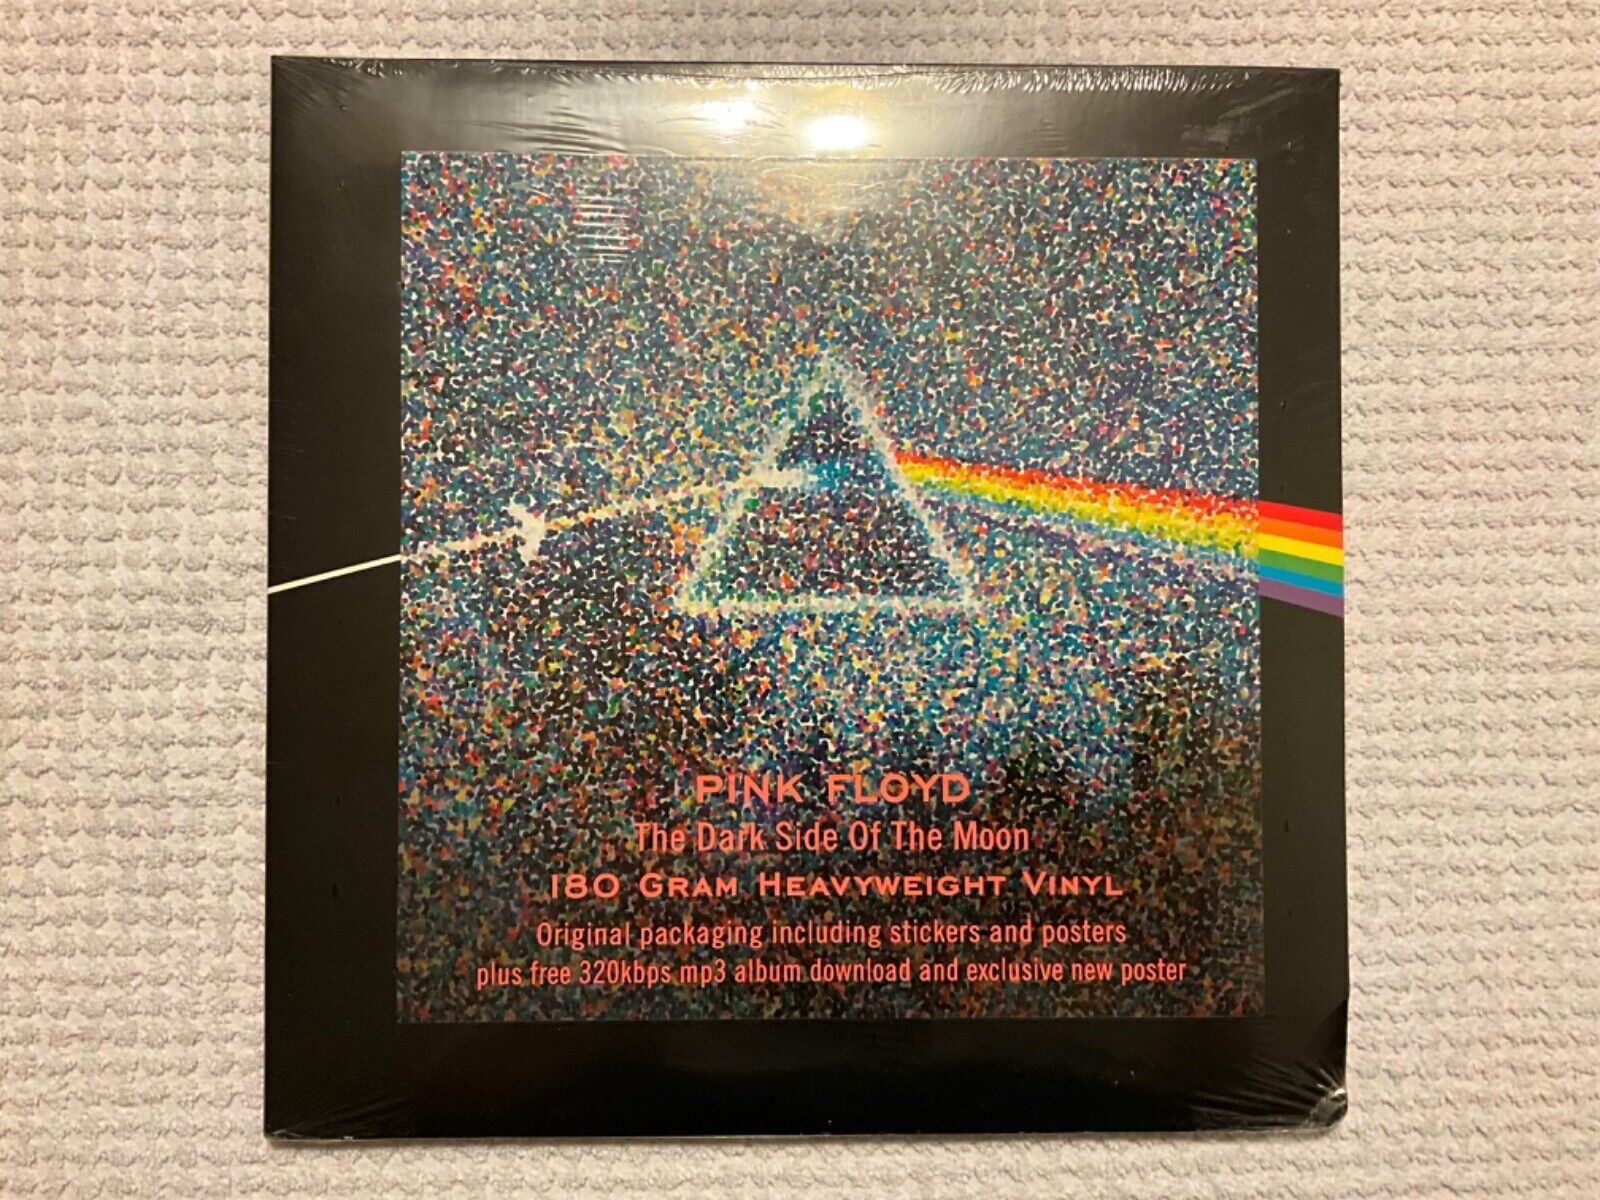 Pink Floyd The Dark Side Of The Moon Vinyl 180 Gram Brand New Sealed With Poster